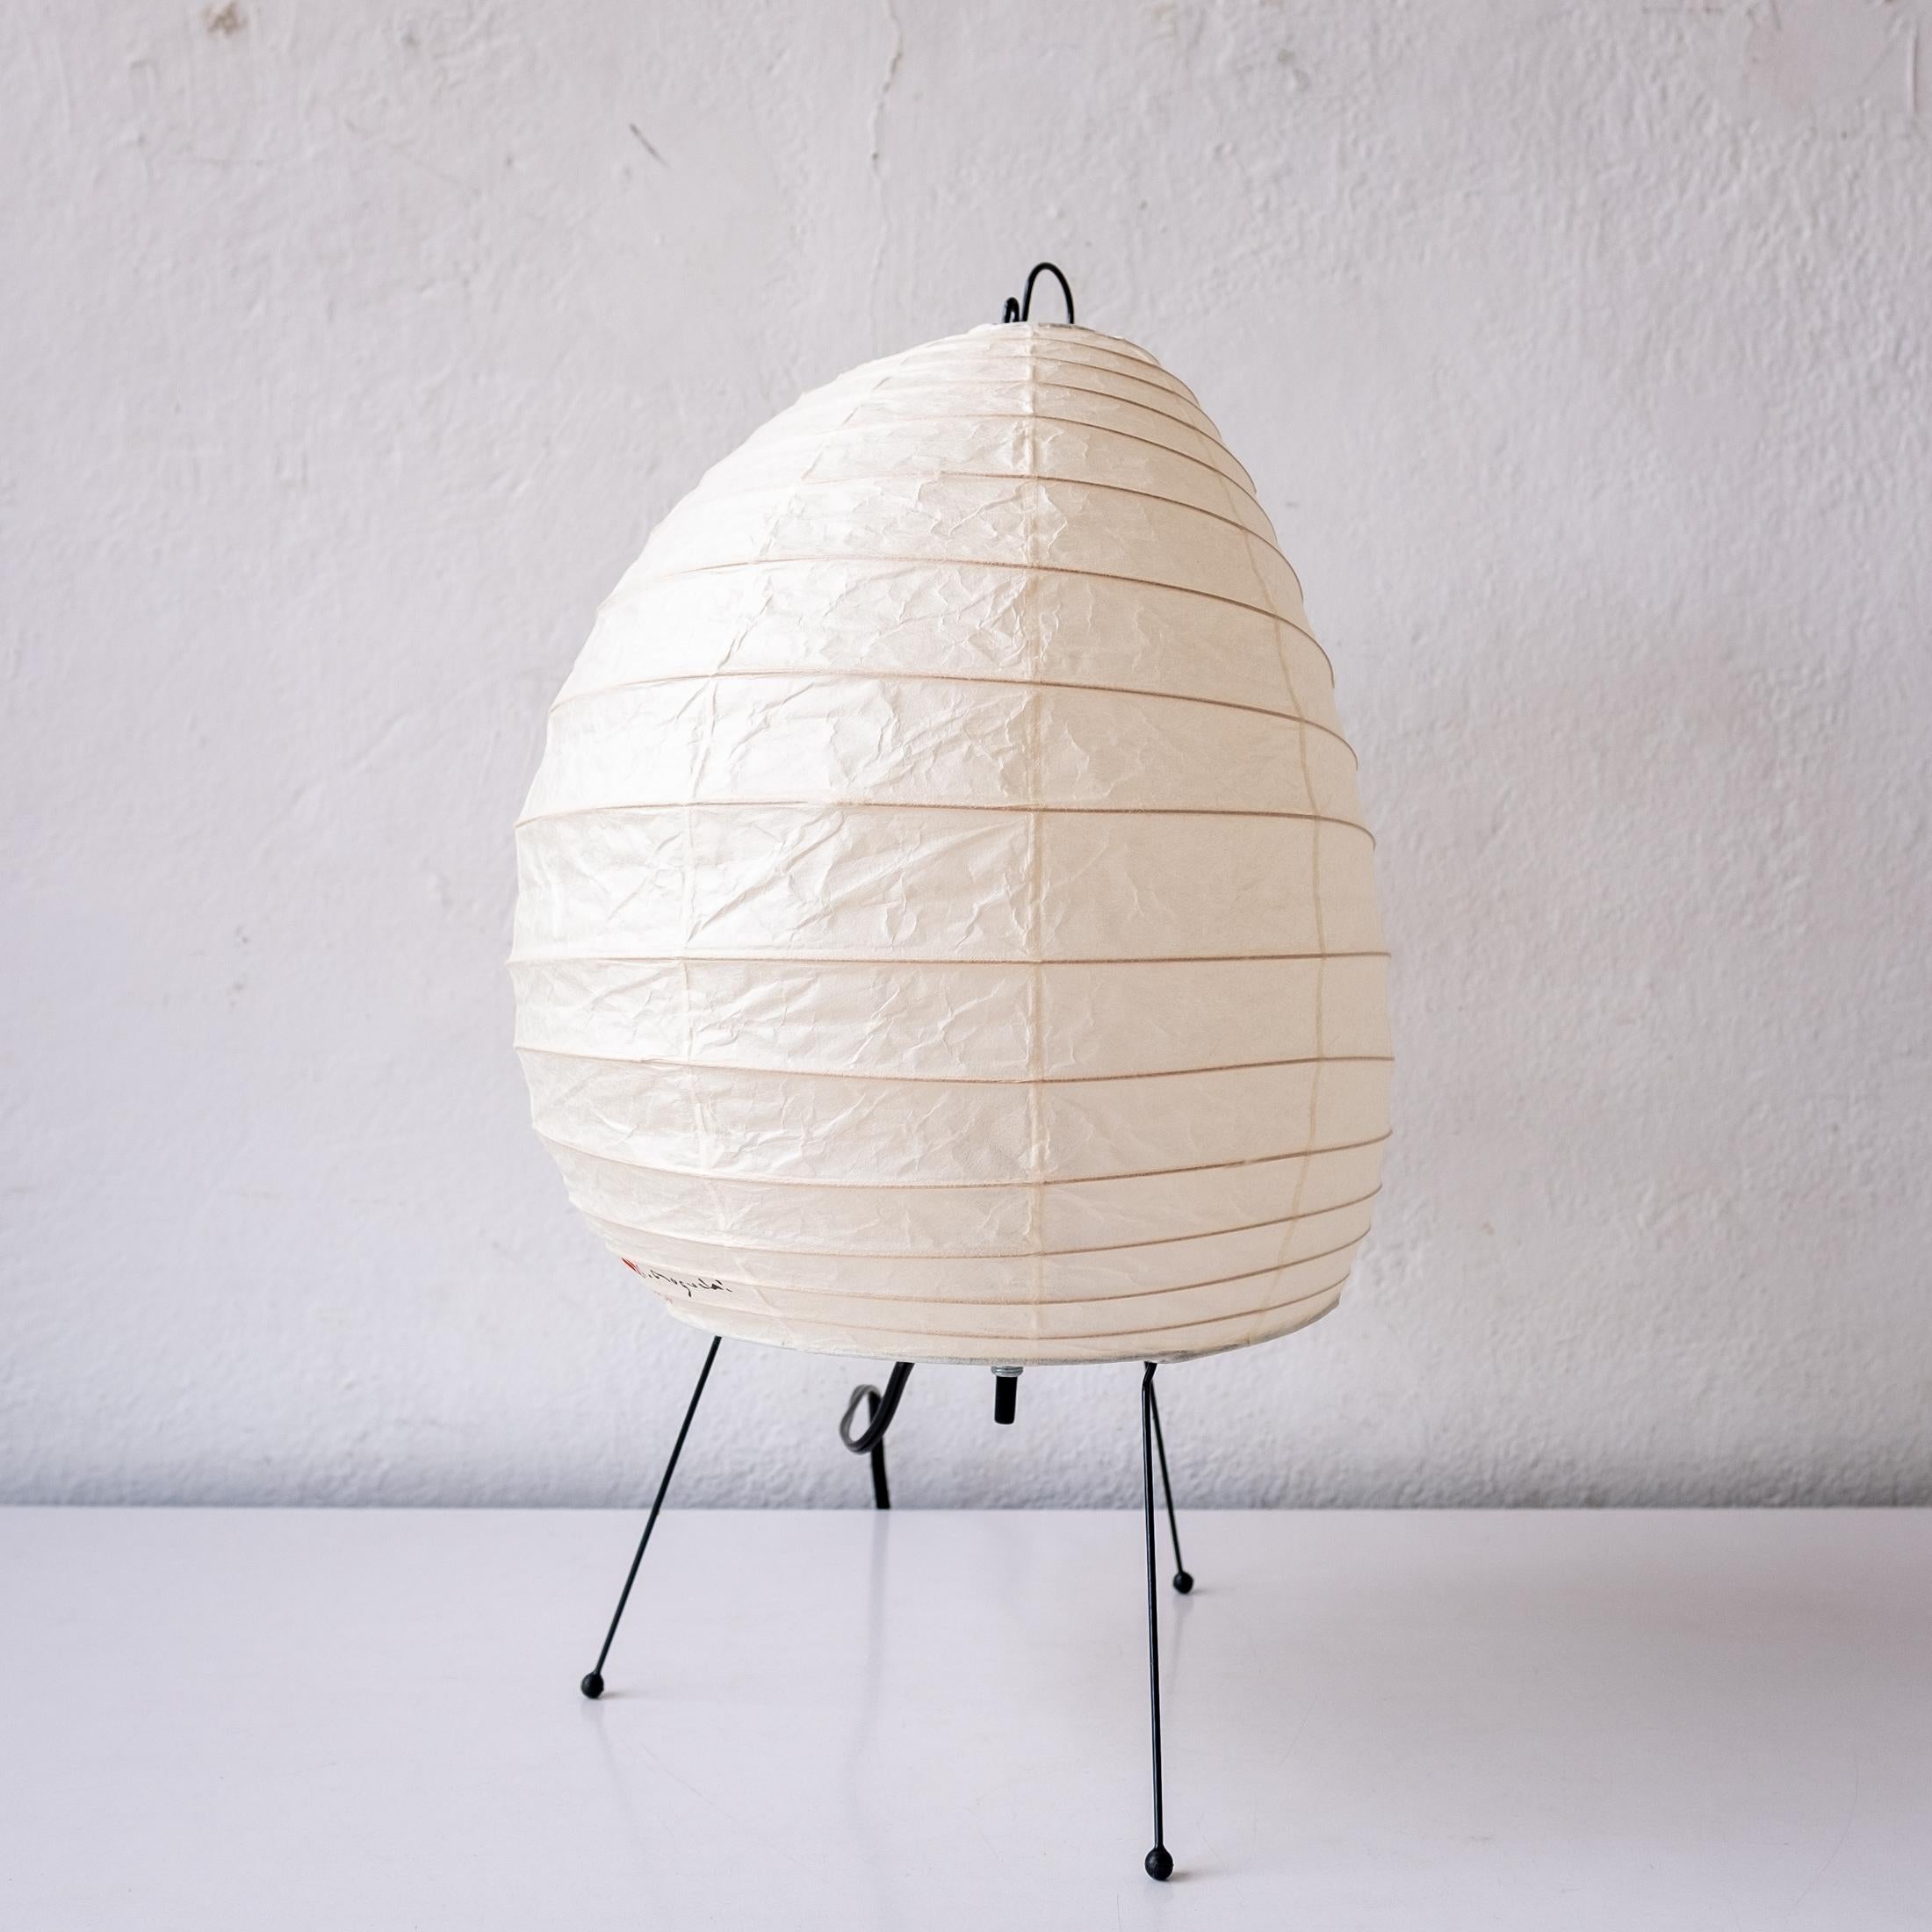 Akari light sculpture by Isamu Noguchi. The shade is made from washi paper and bamboo ribs with Noguchi Akari sun and moon stamp, signature and marked Japan. Designed by Noguchi in the 1950s, this is an unused 1990s example, still in the original